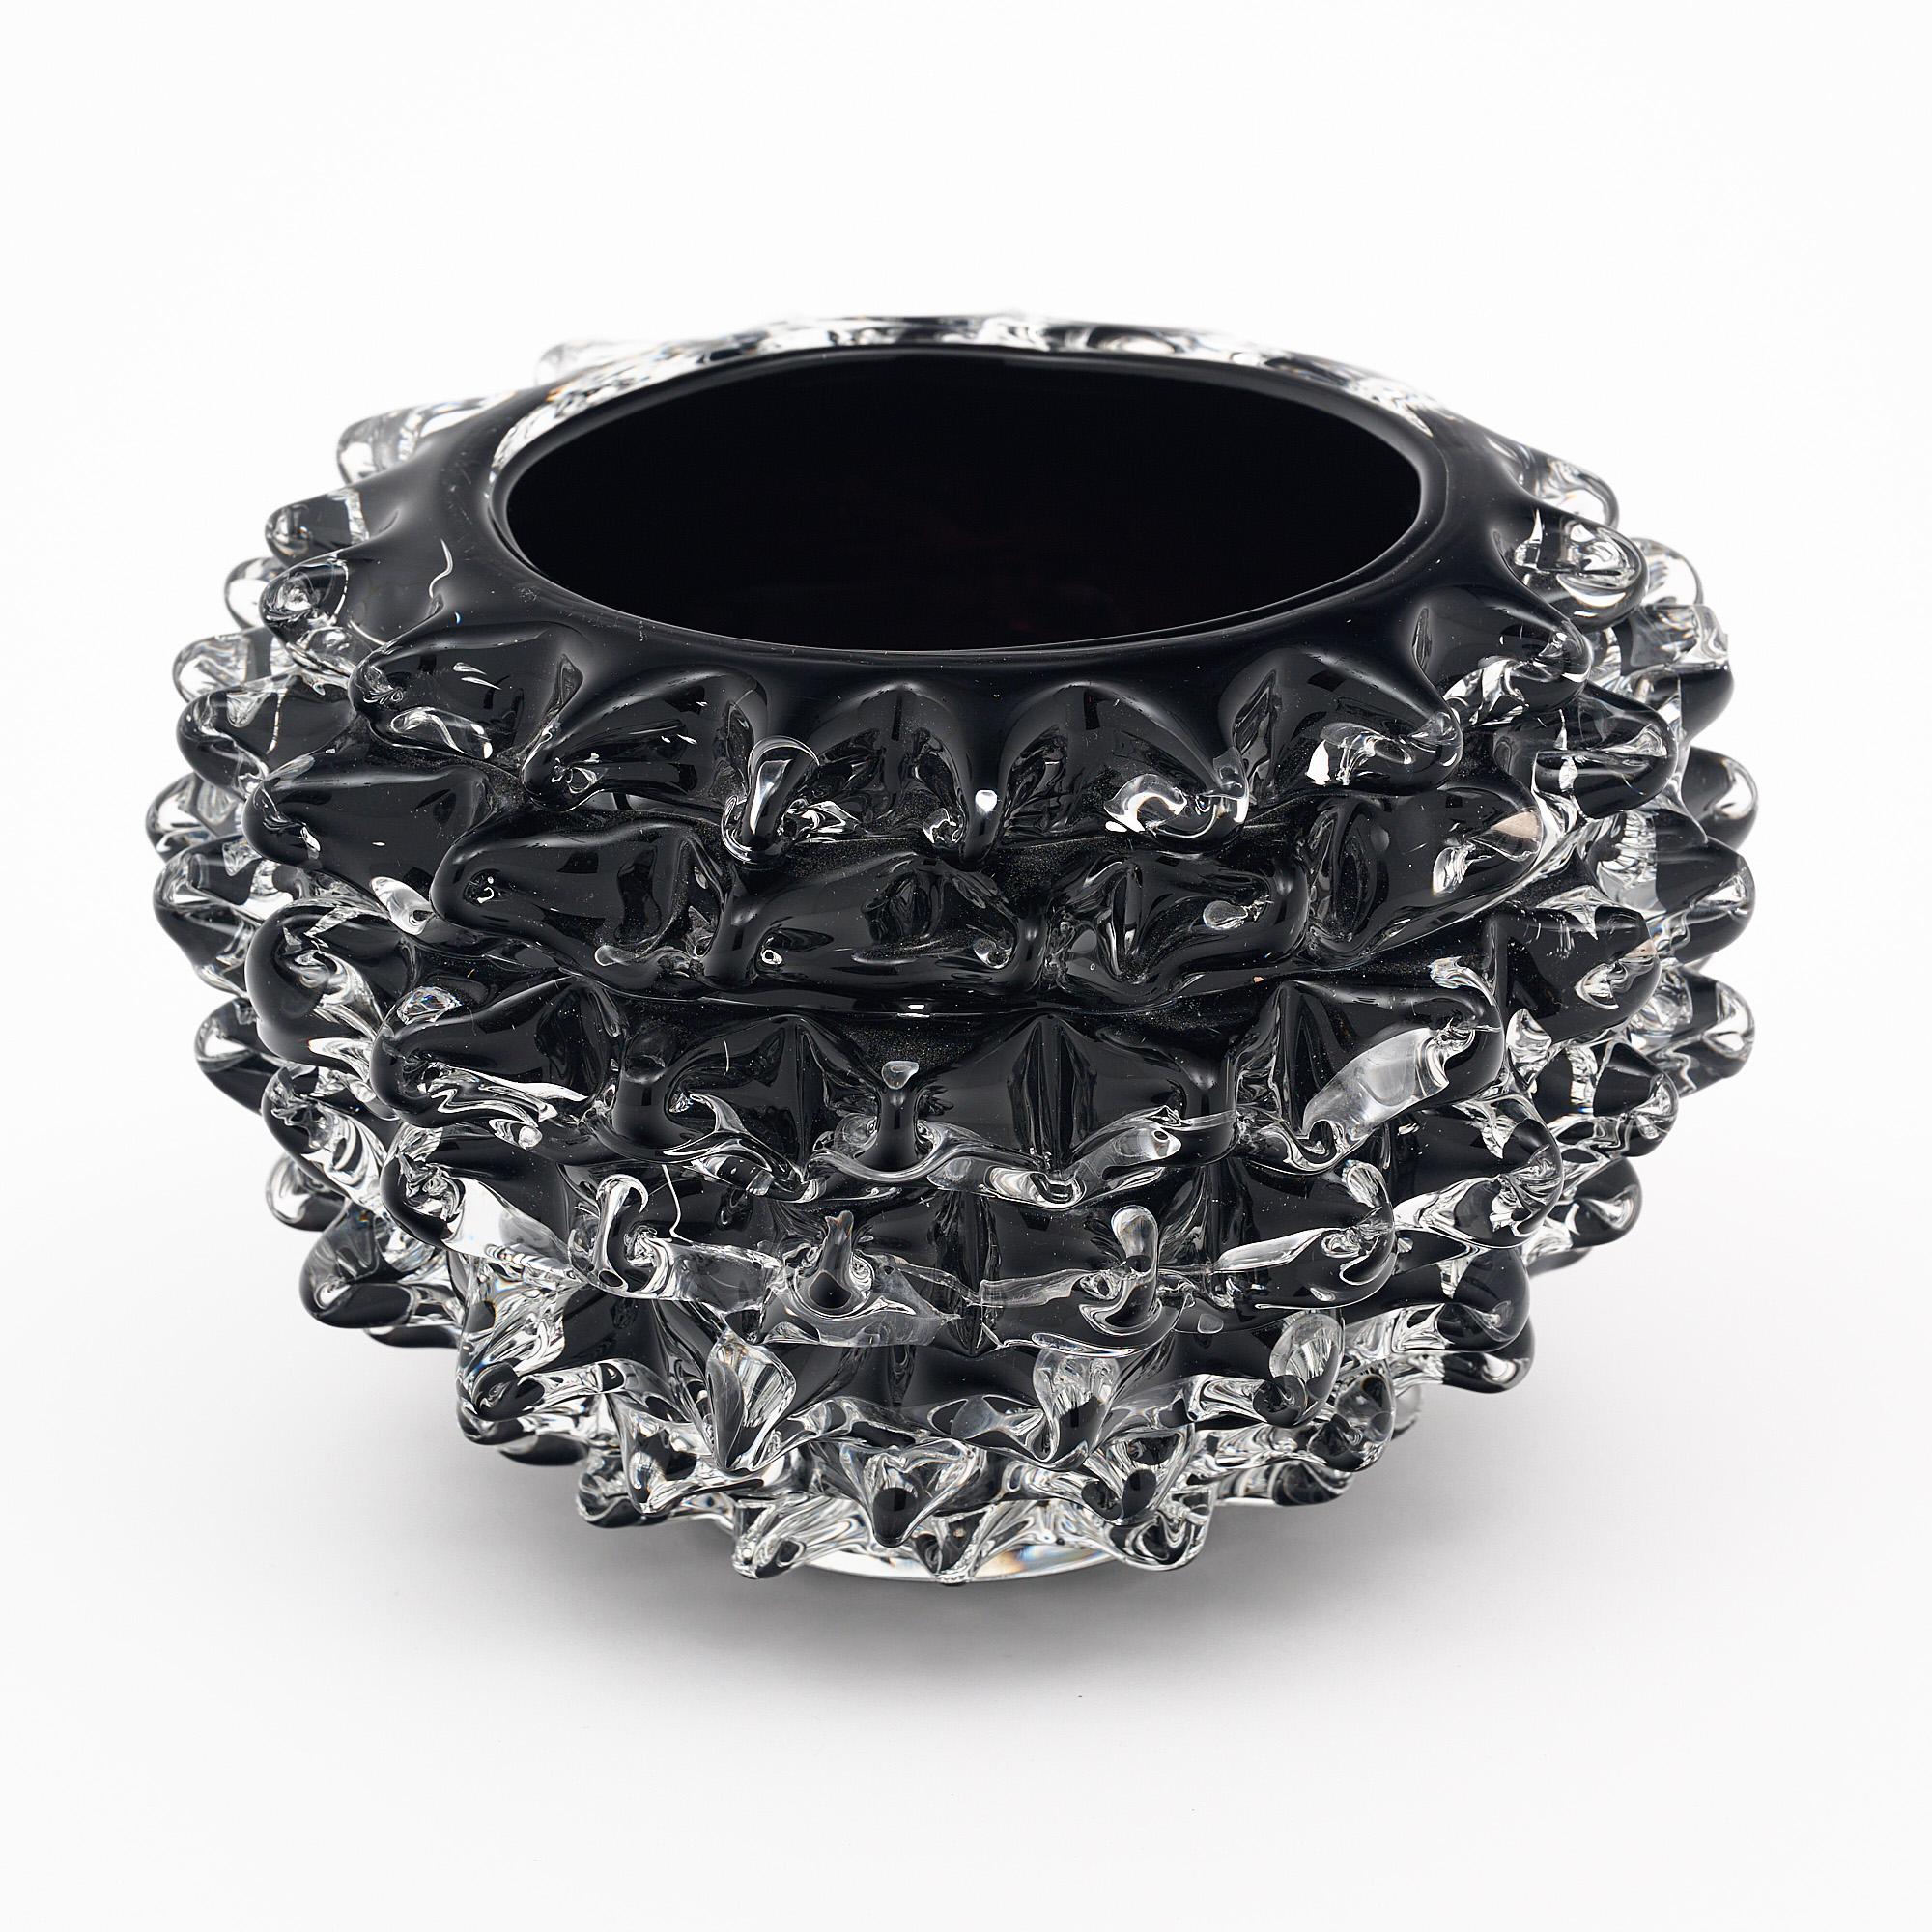 Murano glass bowl, Italian, from the island of Murano. This hand-blown piece has an impressive black color and is made using the rostrate technique. The pair is from the private Jean-Marc Fray Antiques collection and is signed.